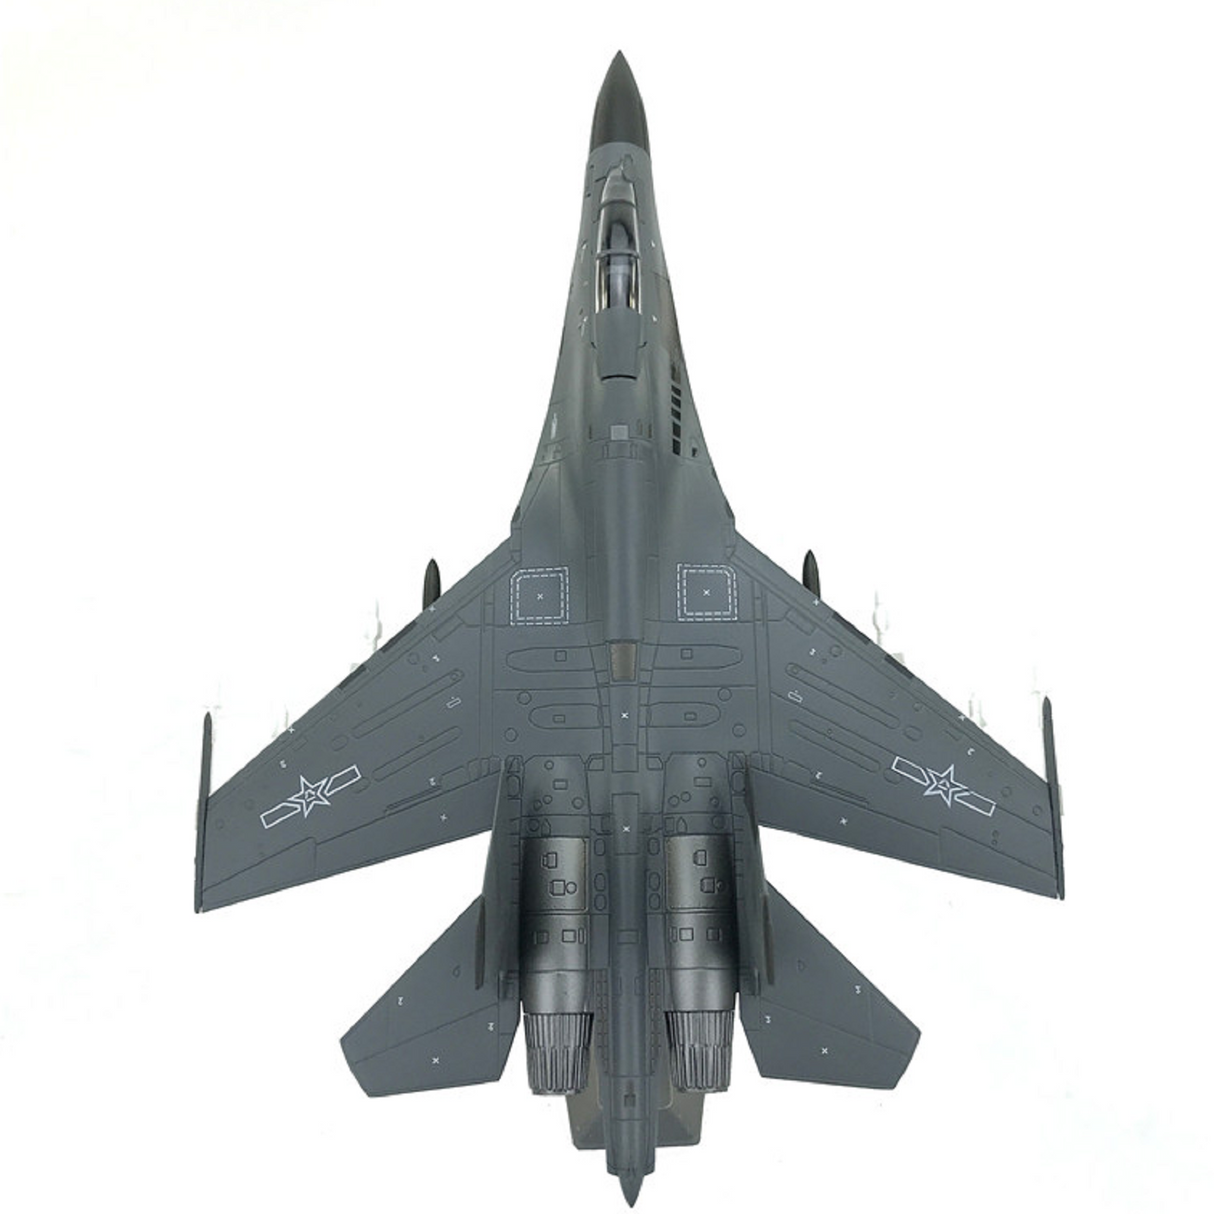 1:48  Air Force J-16 Fighter Alloy Finished Product Model ,Plane Souvenir Static Display